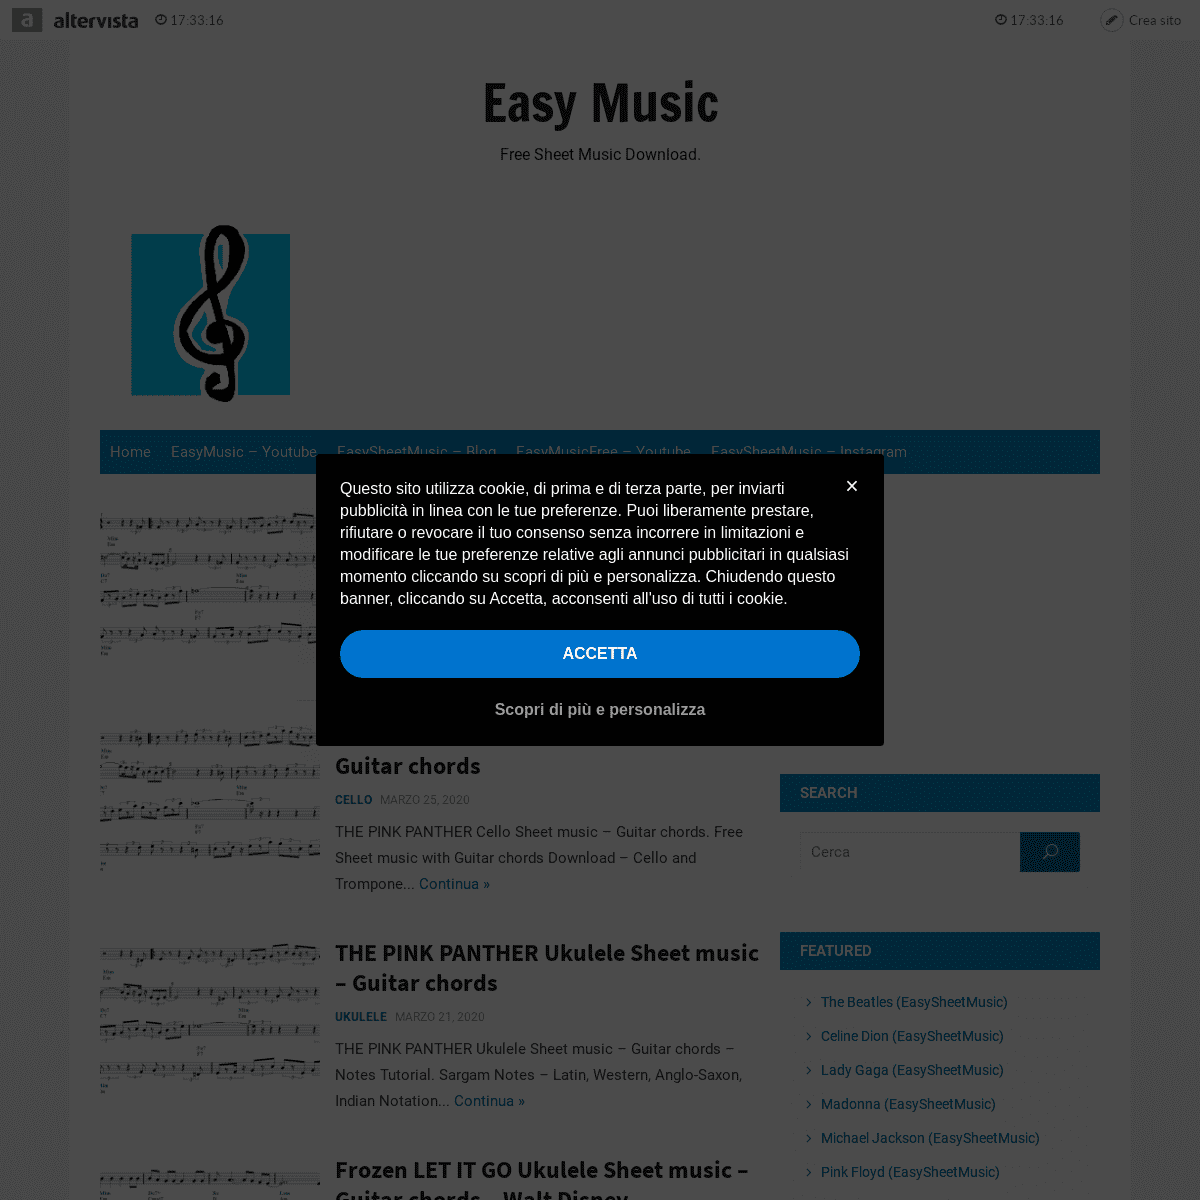 A complete backup of easymusic.altervista.org